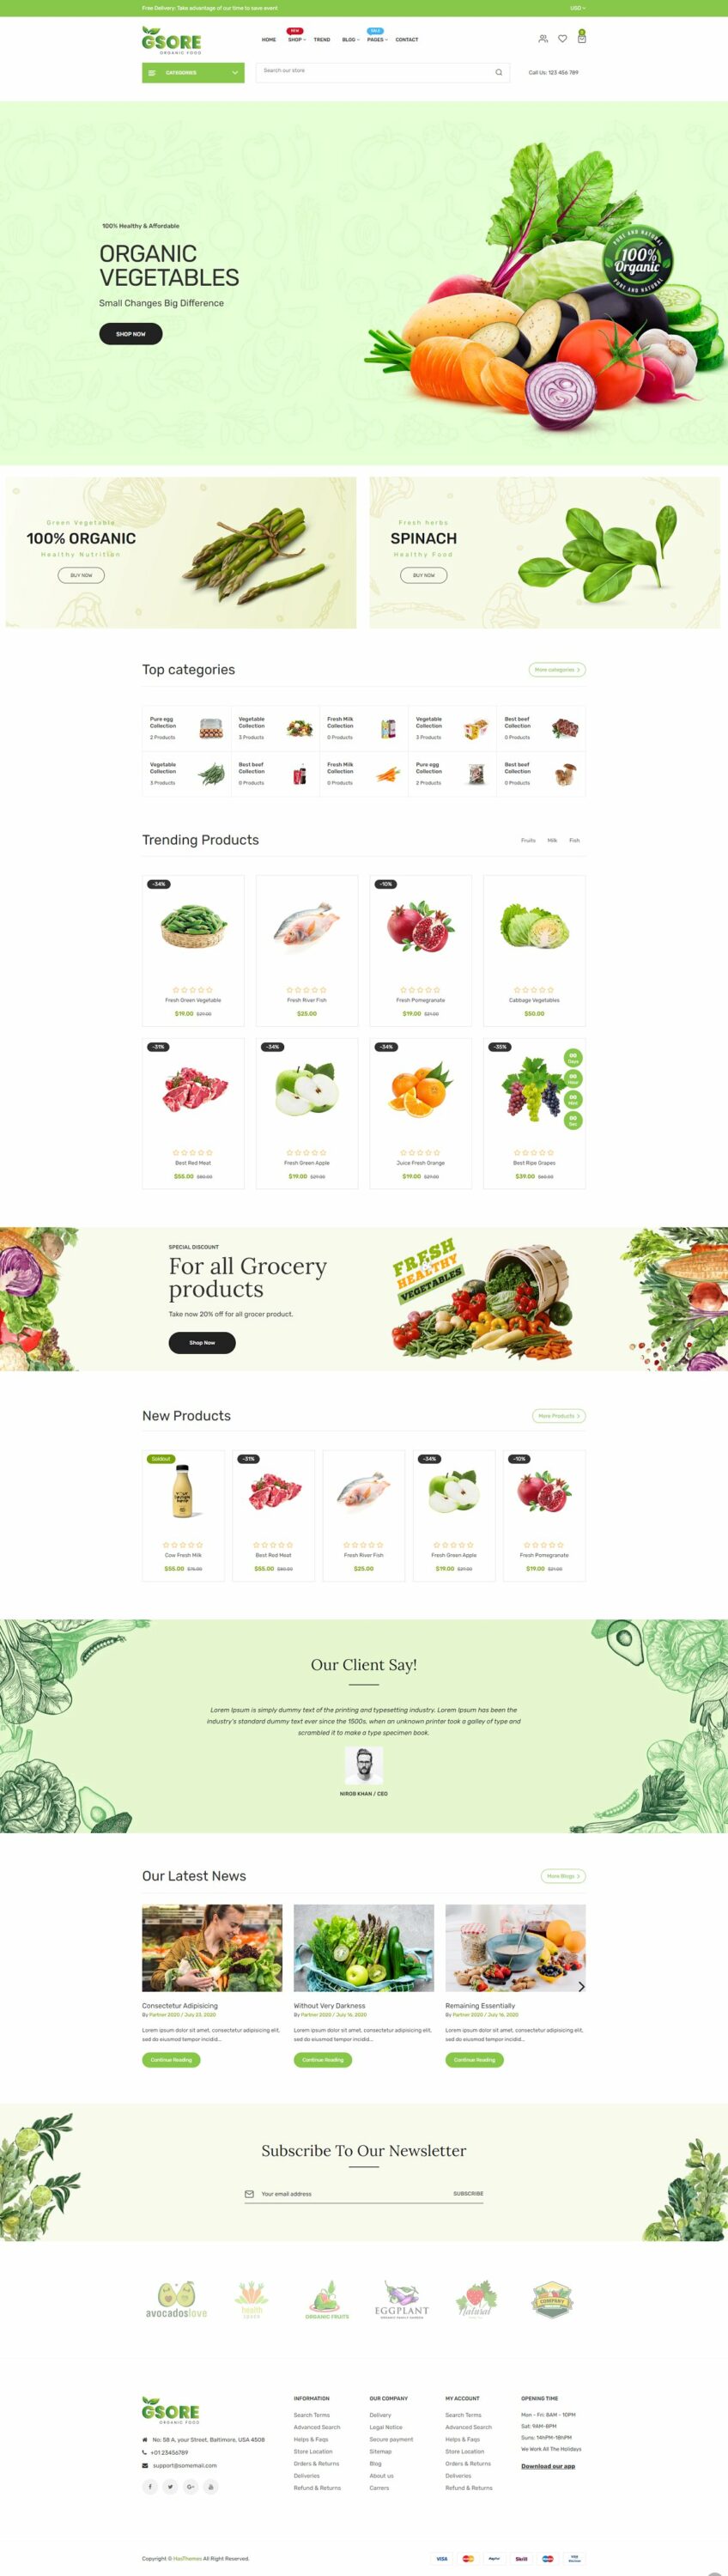 Various options of images with vegetables for sale.